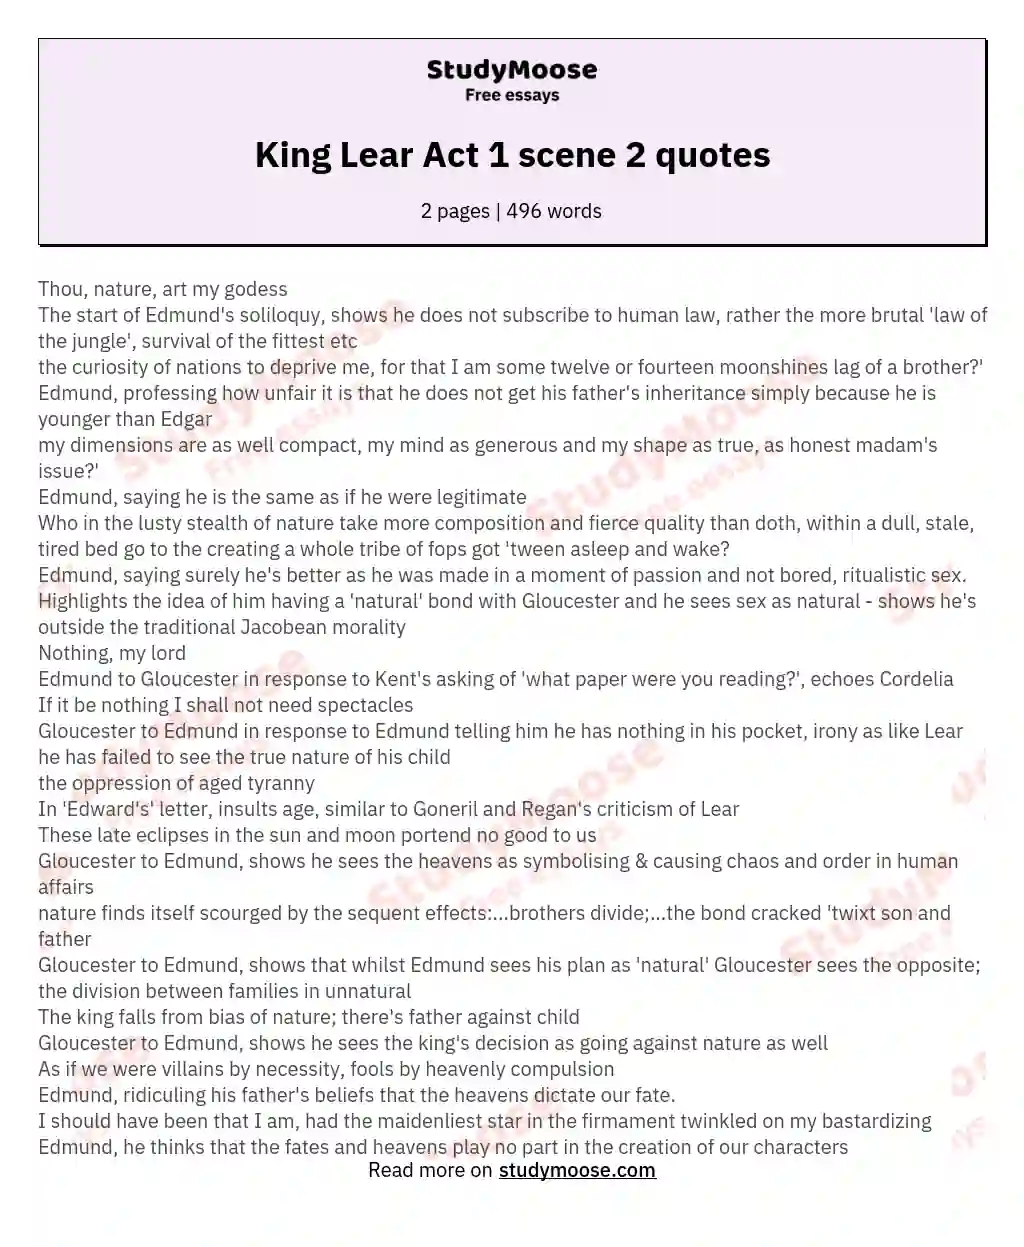 King Lear Act 1 scene 2 quotes